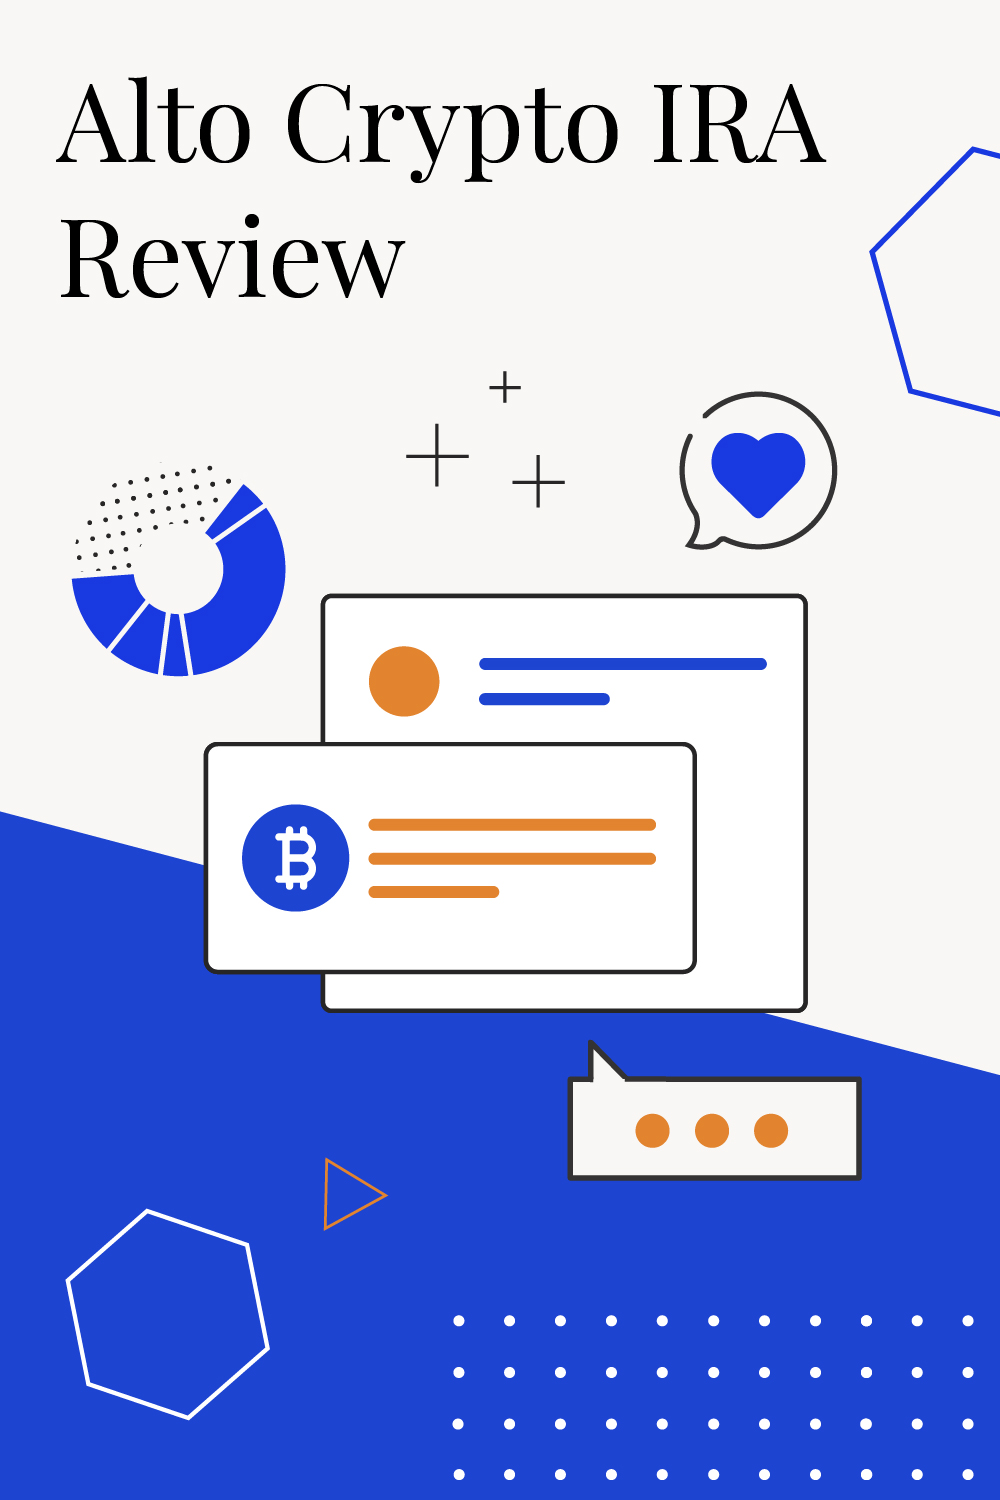 Alto CryptoIRA Review | Features, Pros & Cons, & Pricing